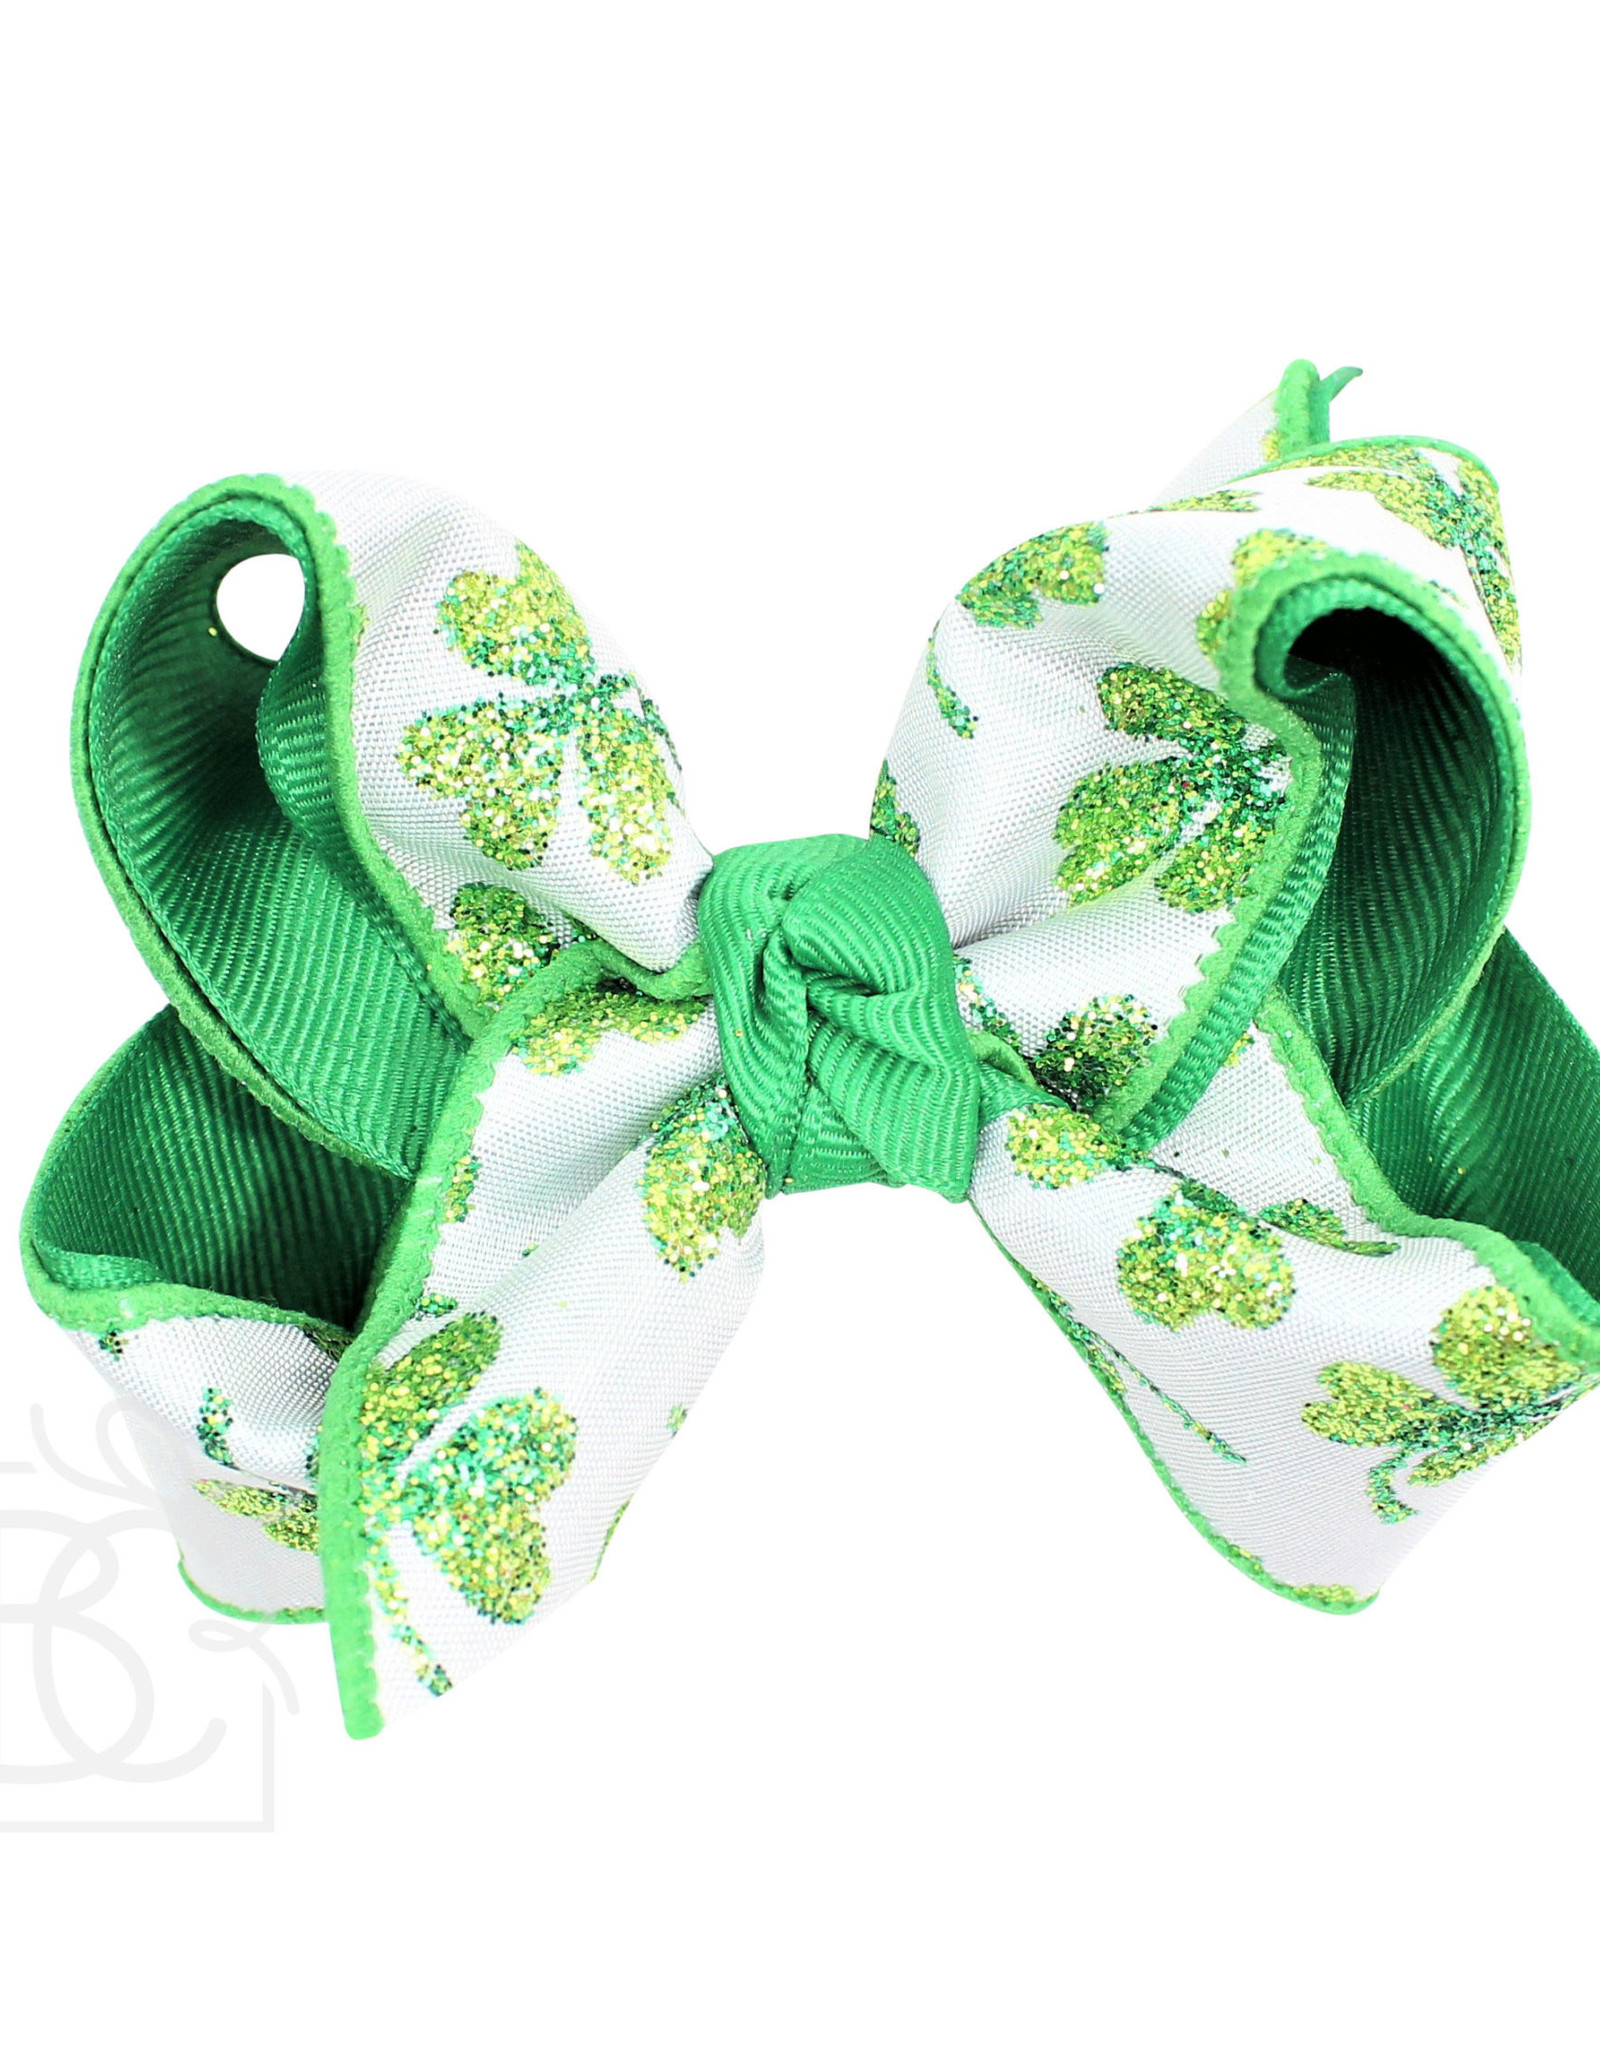 ST. PATRICK'S LUCKY BOW  ON ALLIGATOR CLIP